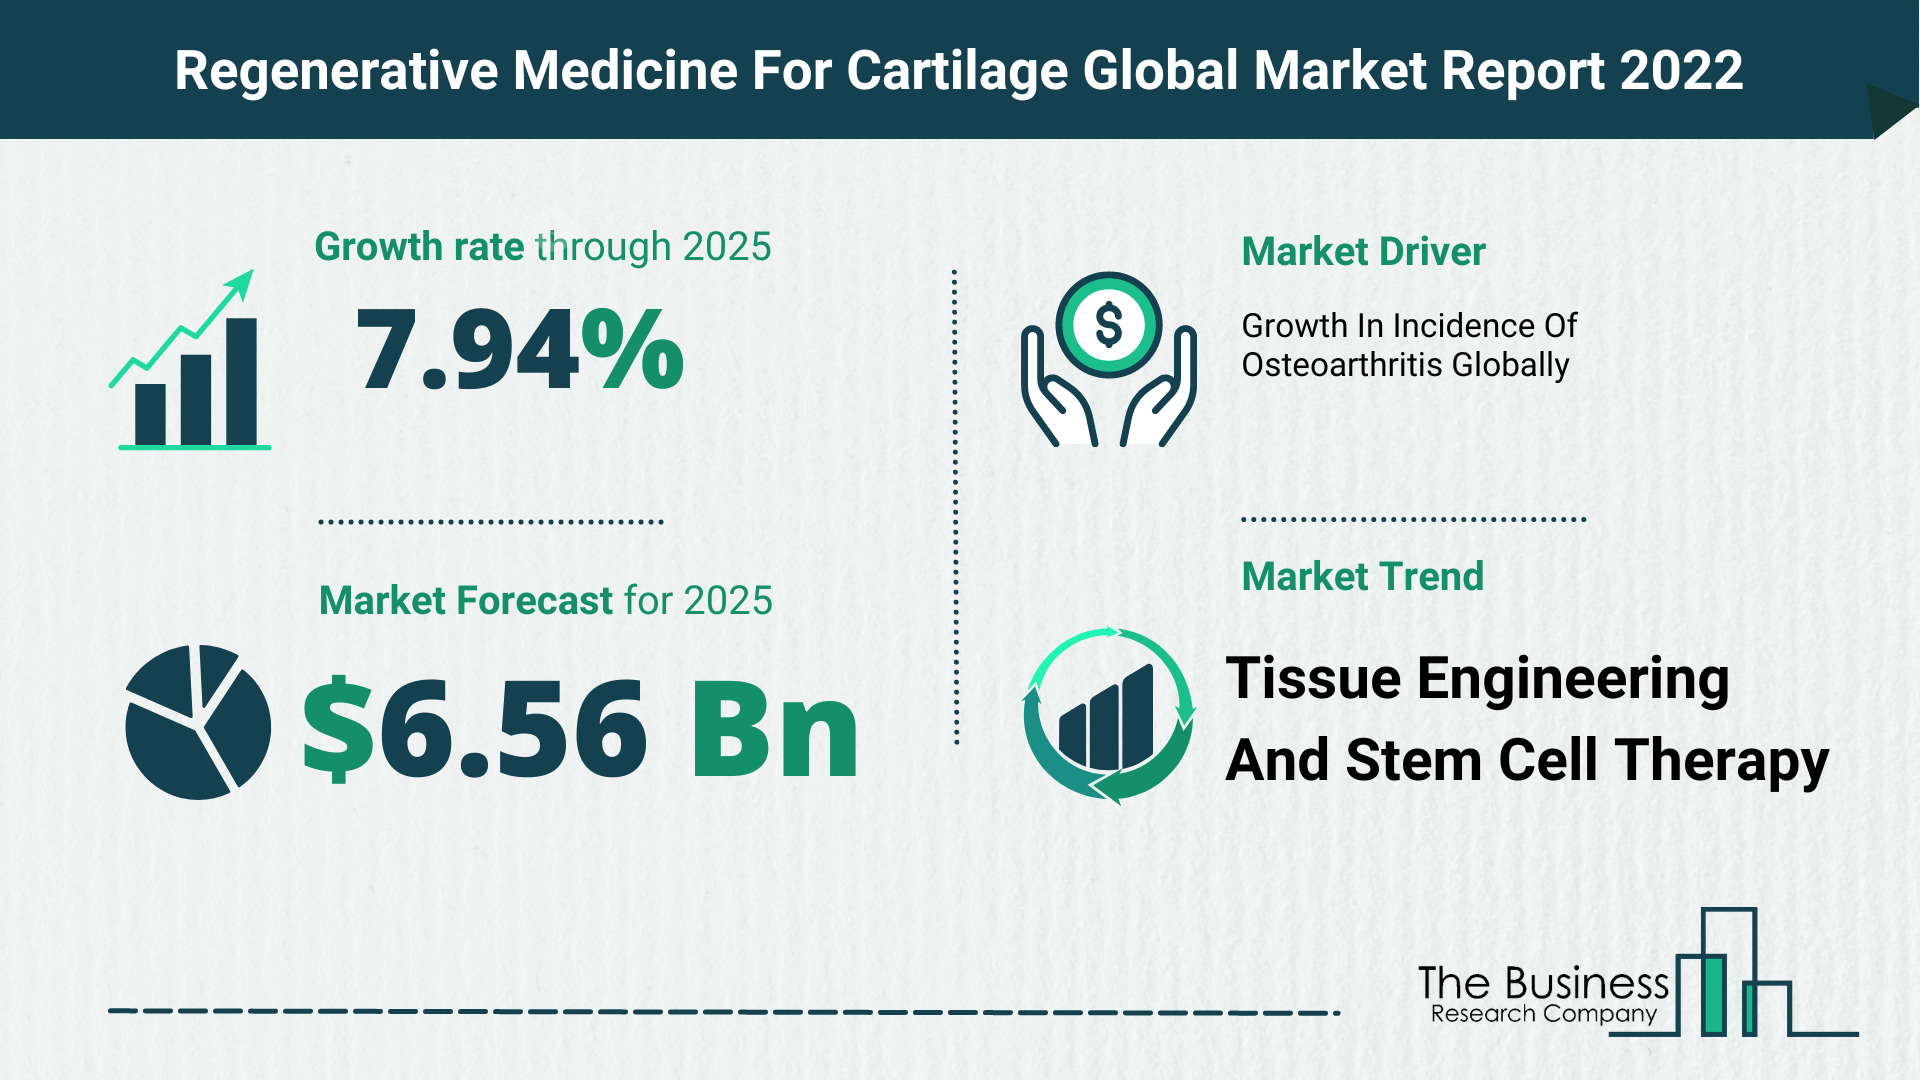 The Regenerative Medicine For Cartilage Market Share, Market Size, And Growth Rate 2022